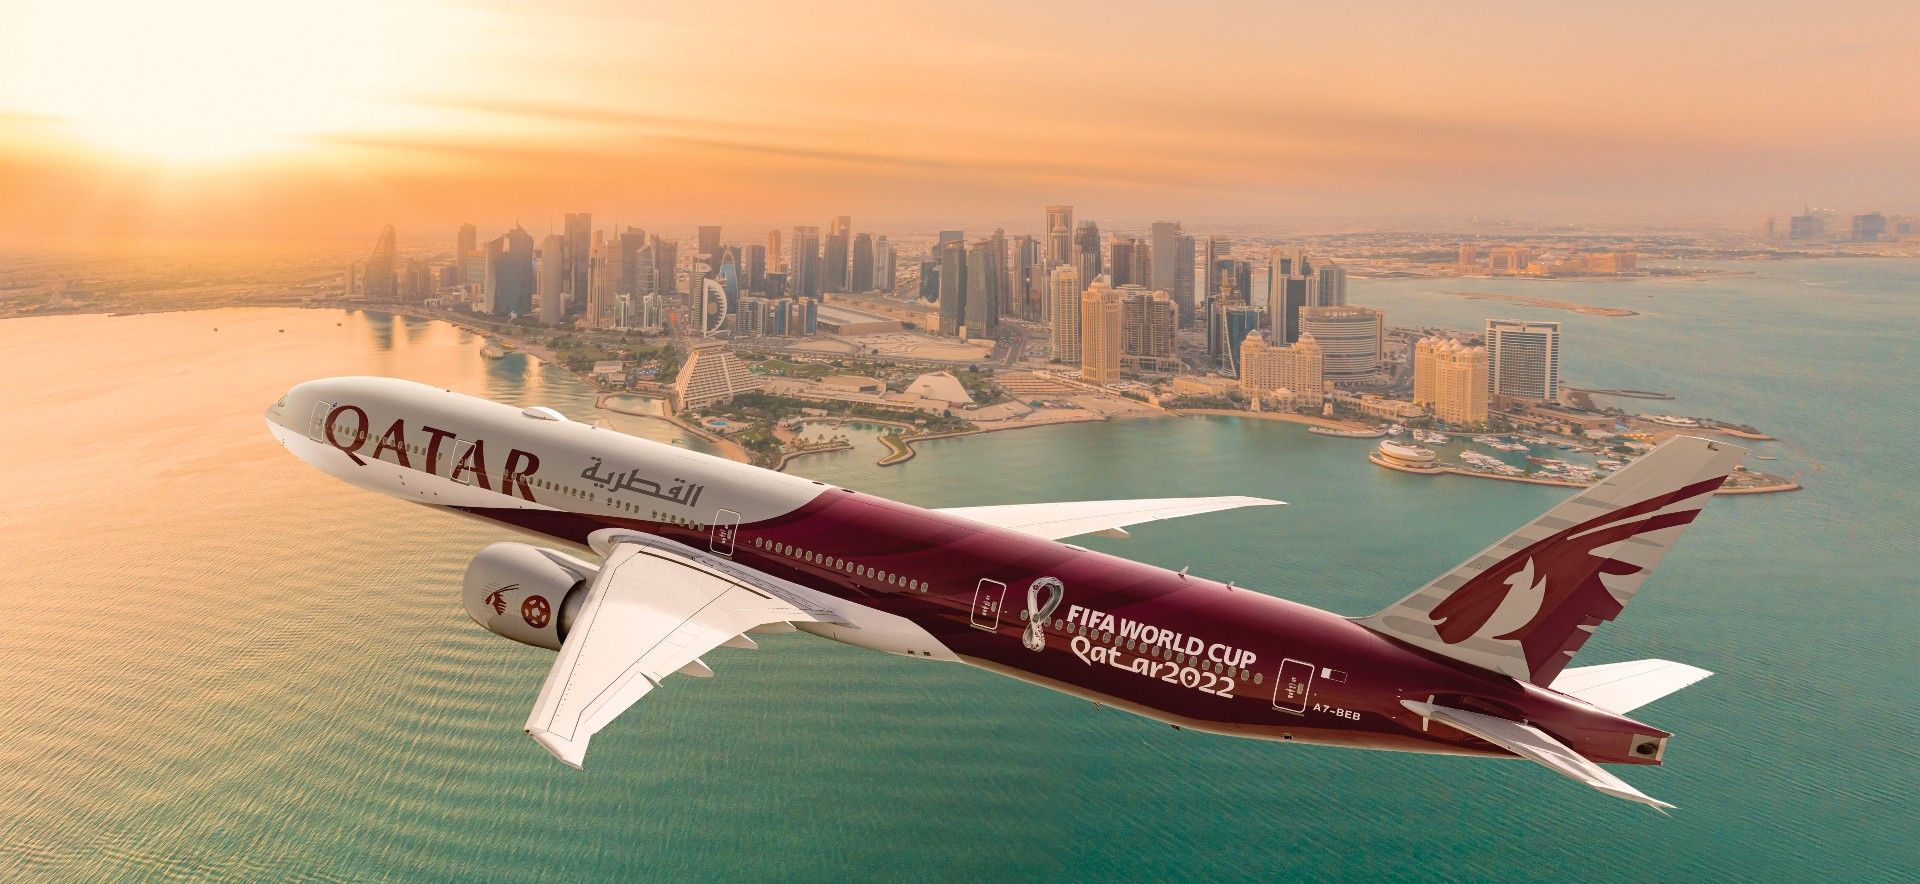 A Qatar Airways Boeing 777 wearing the 2022 FIFA World Cup livery is seen flying over the city.